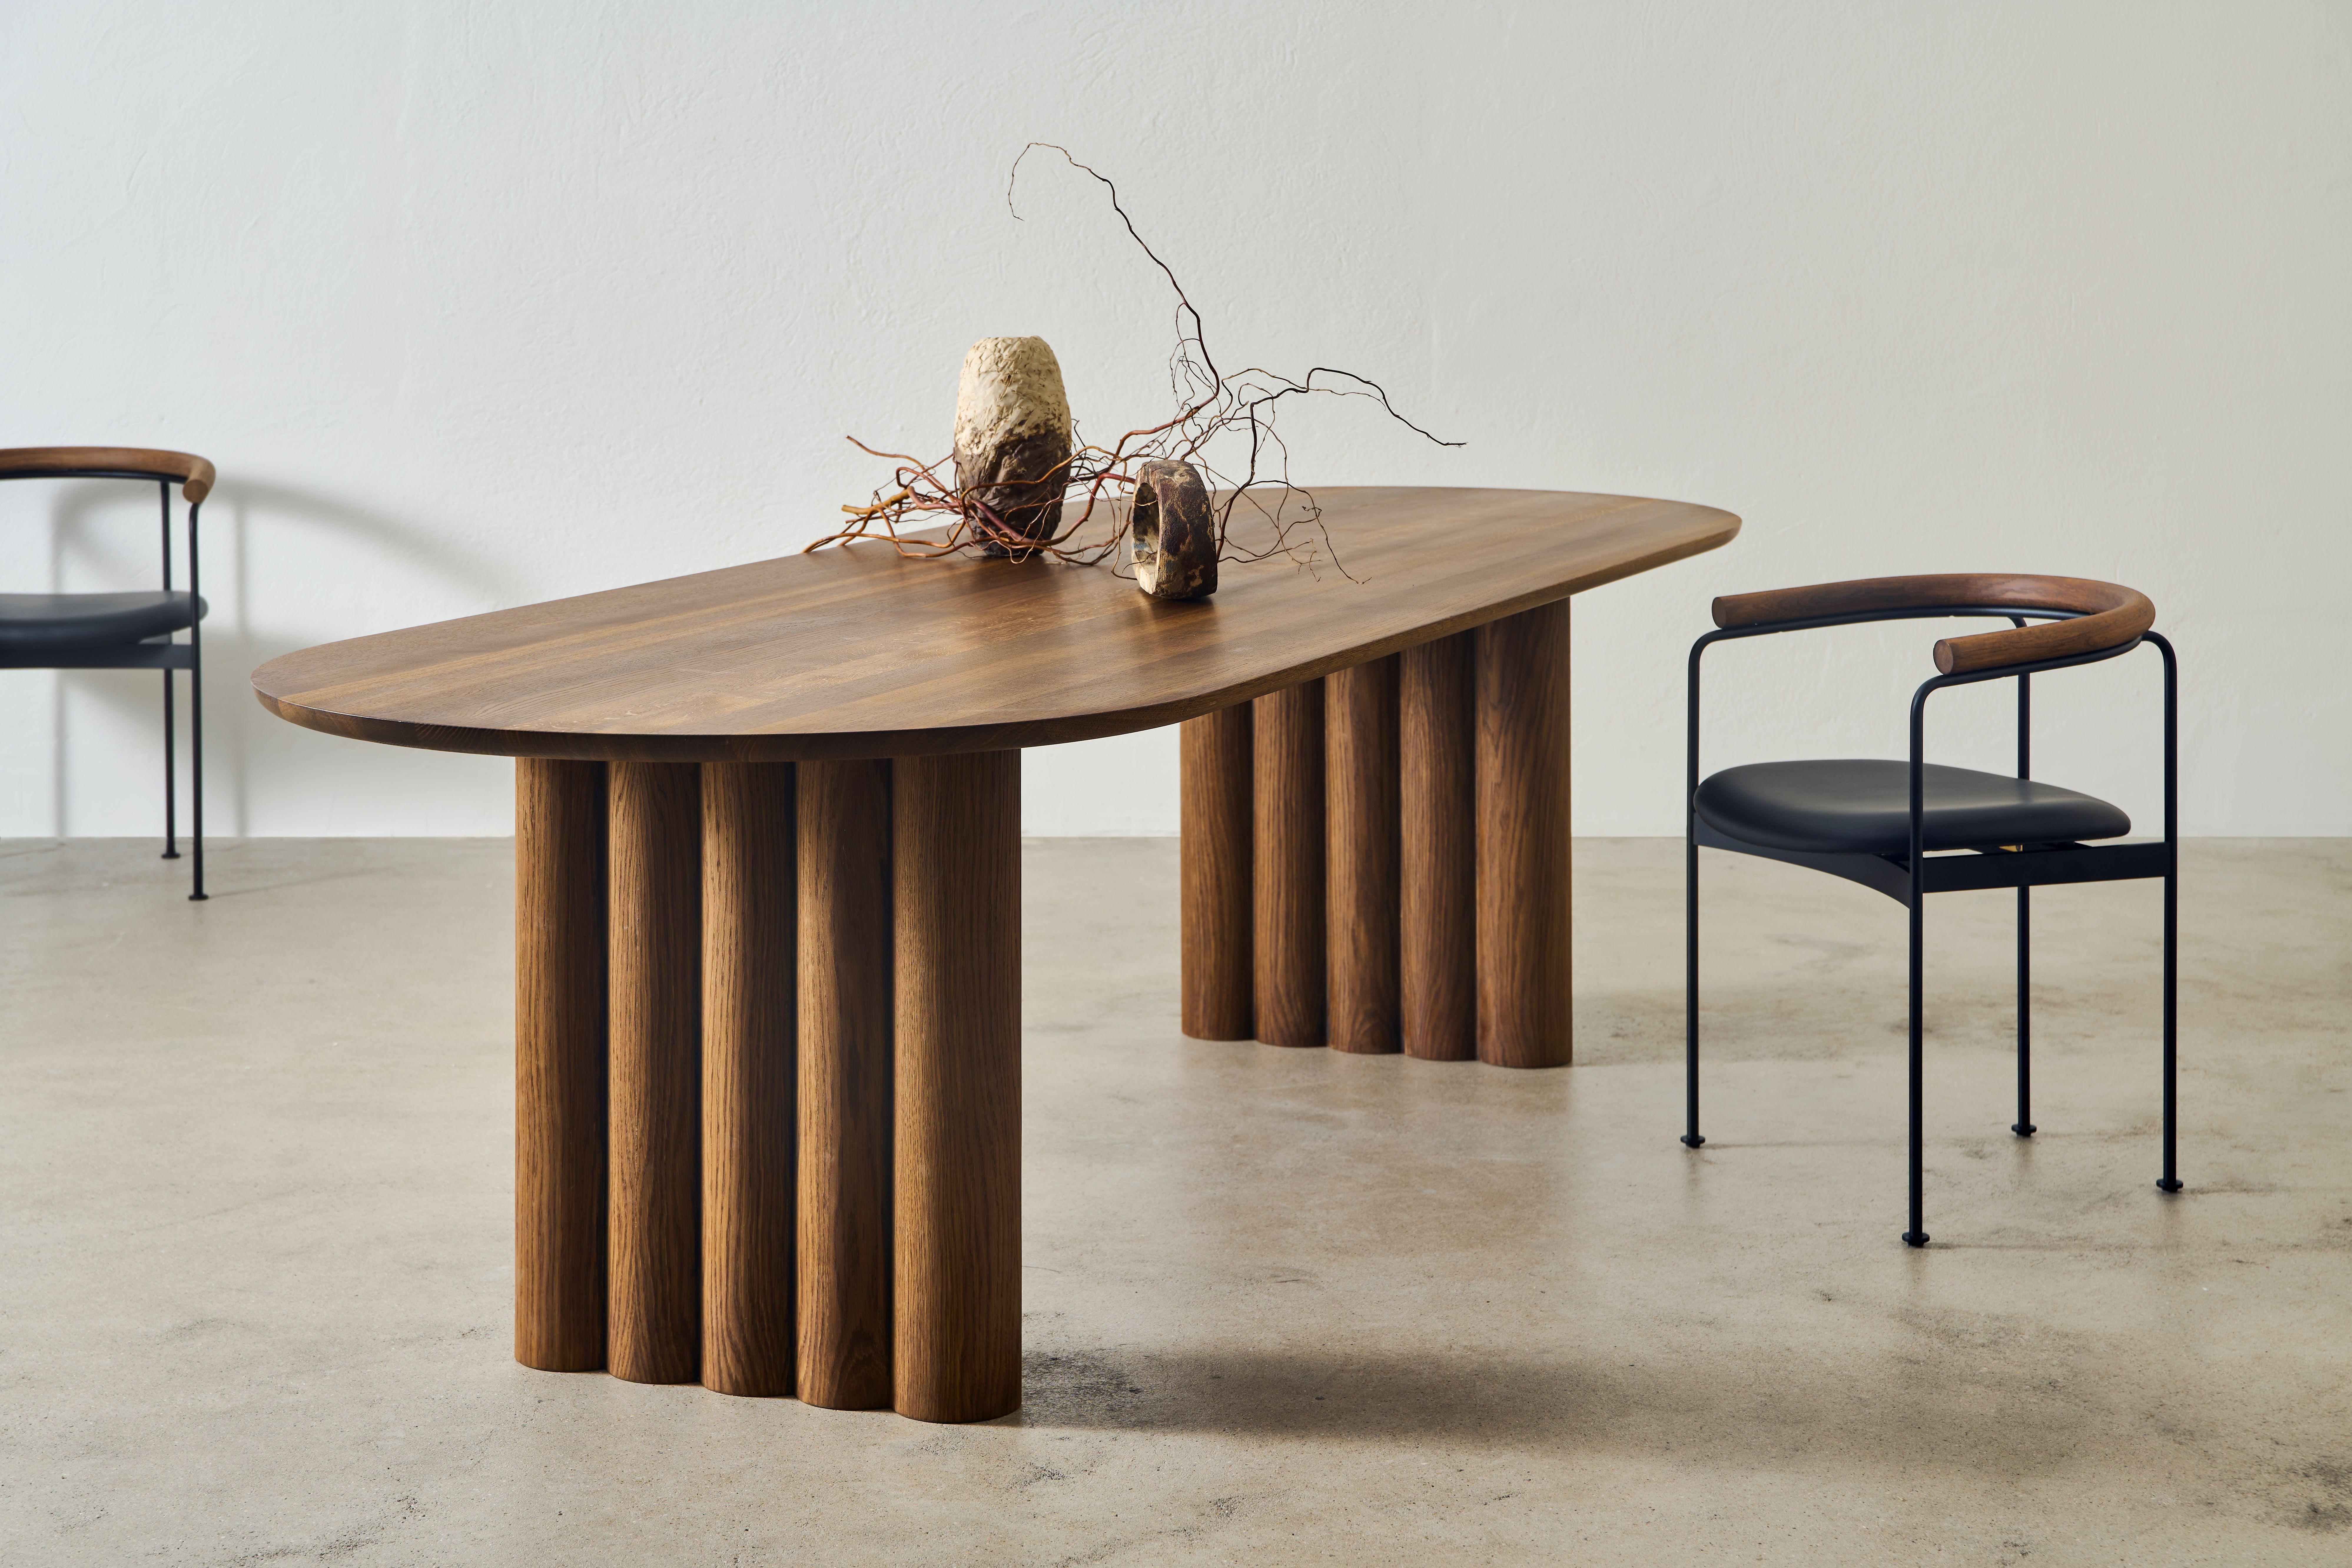 PLUSH dining table, oval, 300 cm.
Solid wood table top and legs. Handmade in Denmark. 
Signed by Jacob Plejdrup for DK3

Table's height: 72 or 74 cm
Table top’s thickness: 30-40mm
Legs width: 130mm or 150mm

Table top dimensions:
– 200 x